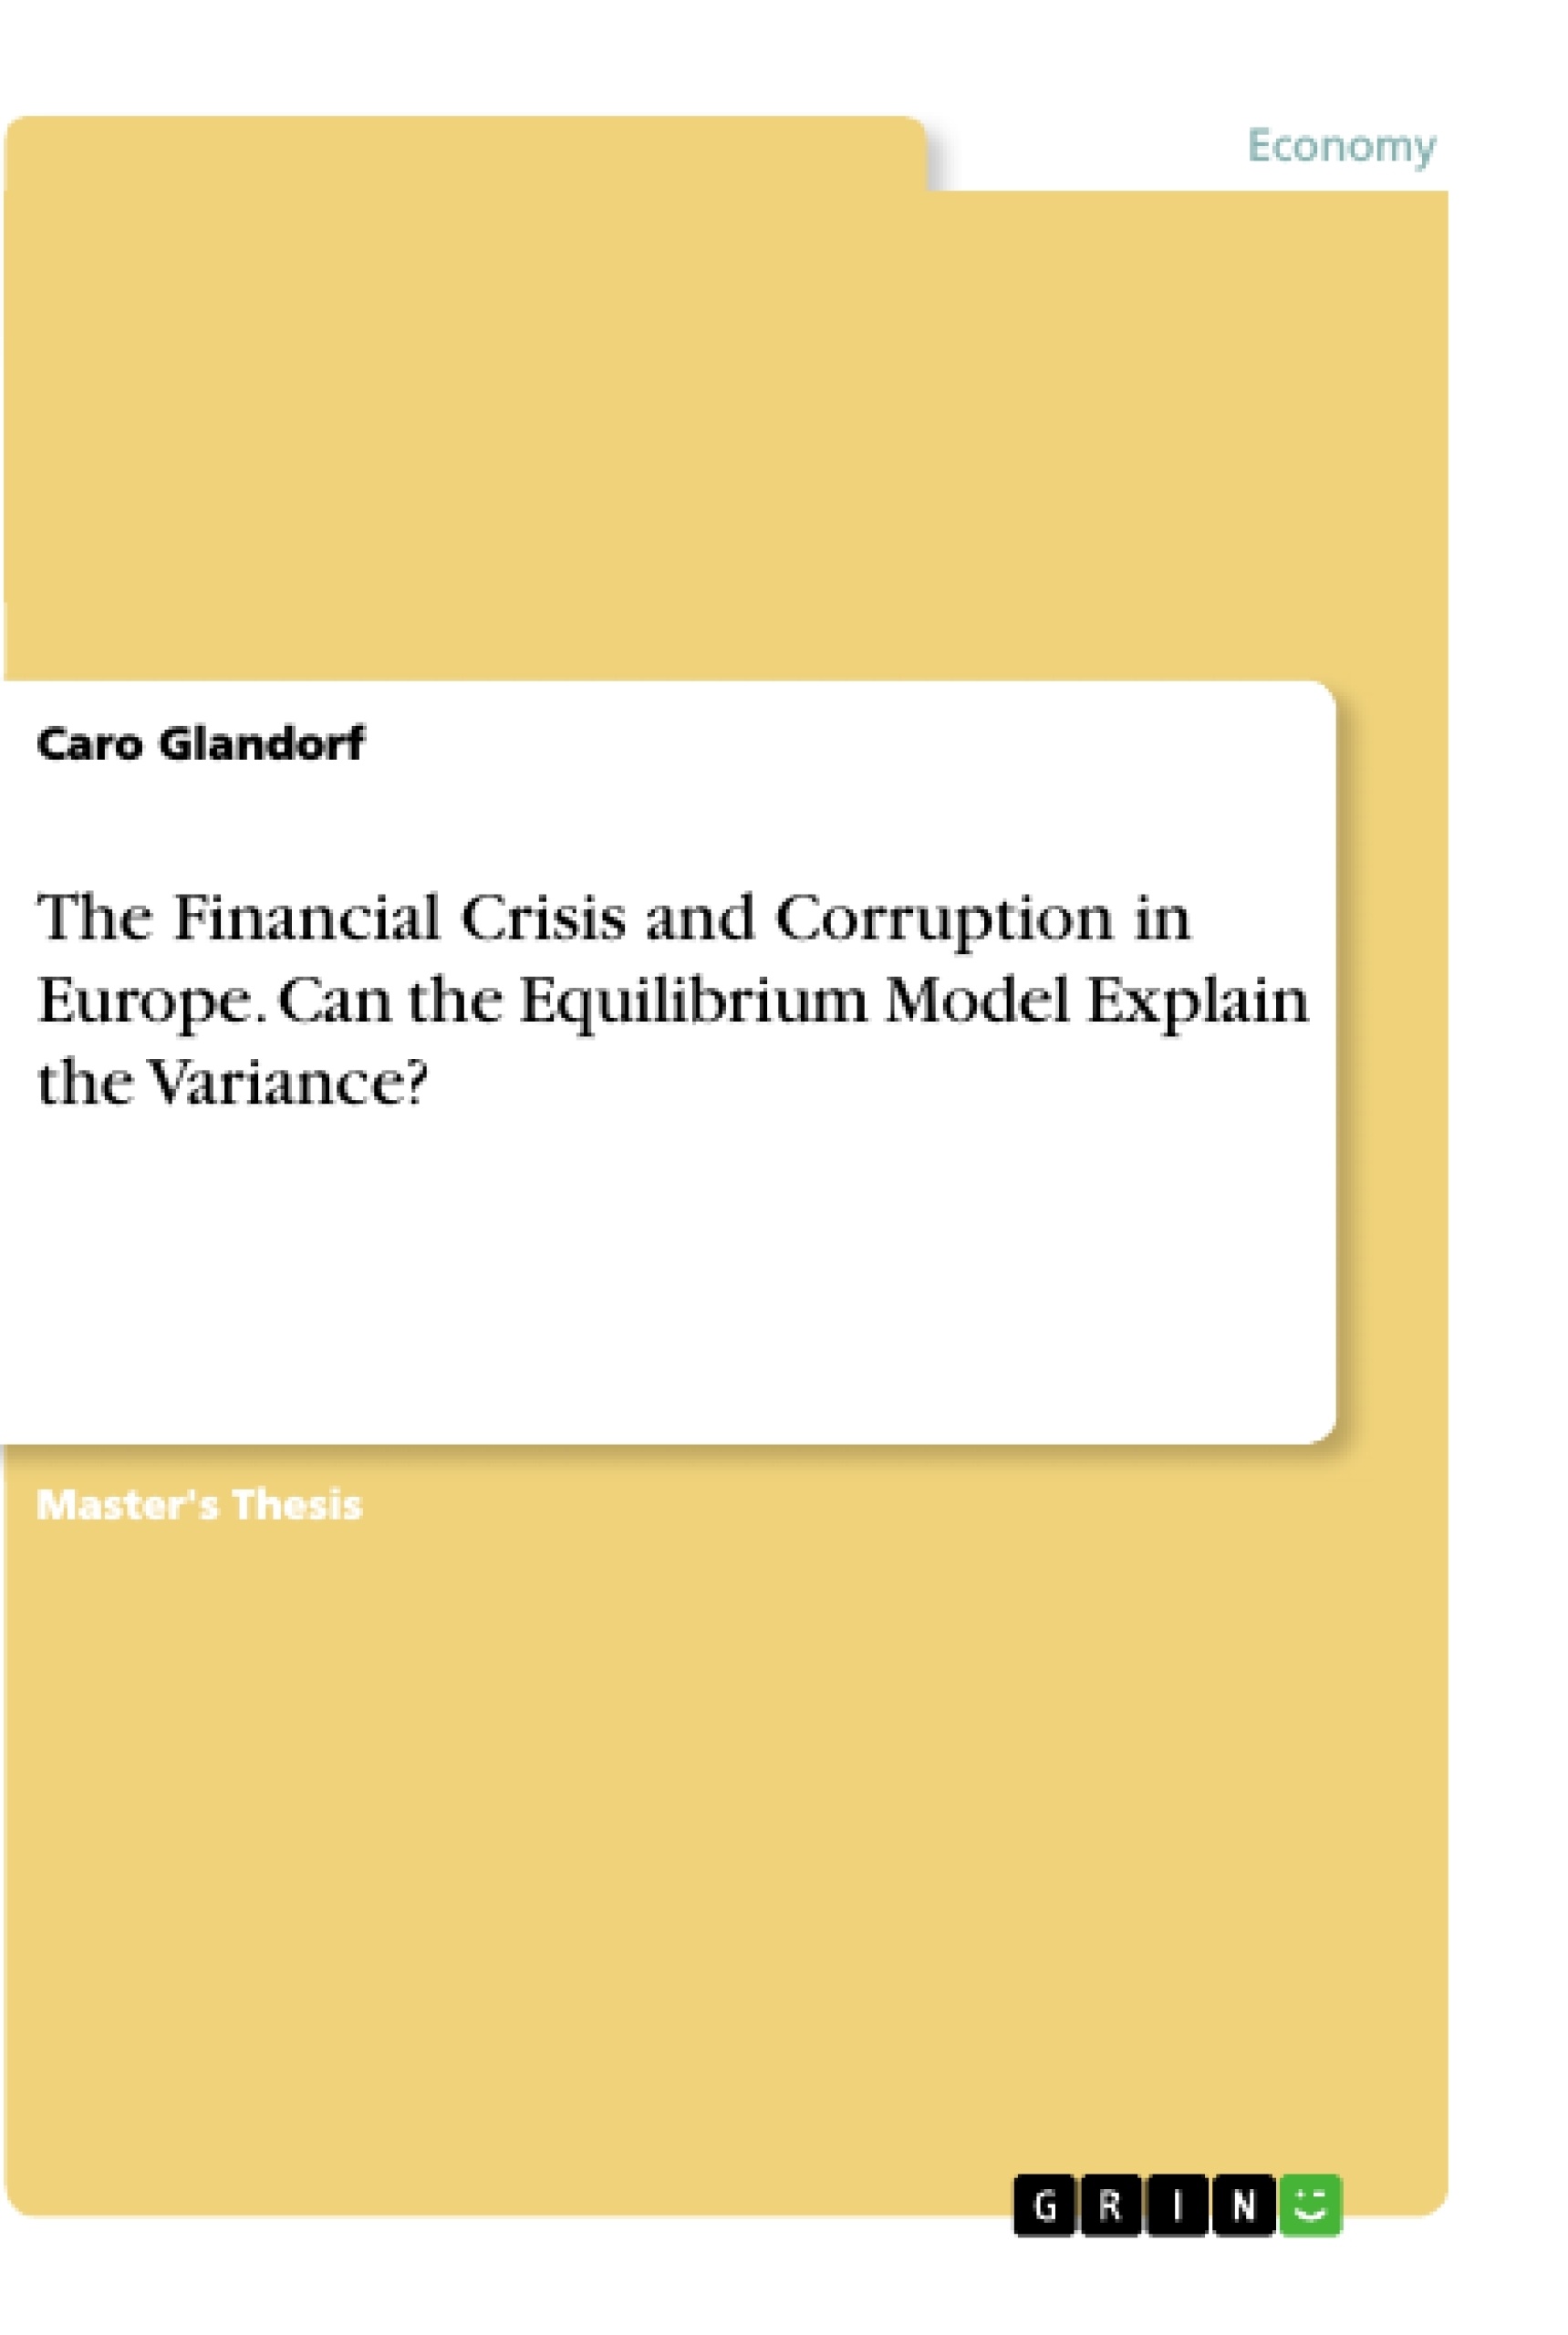 Título: The Financial Crisis and Corruption in Europe. Can the Equilibrium Model Explain the Variance?